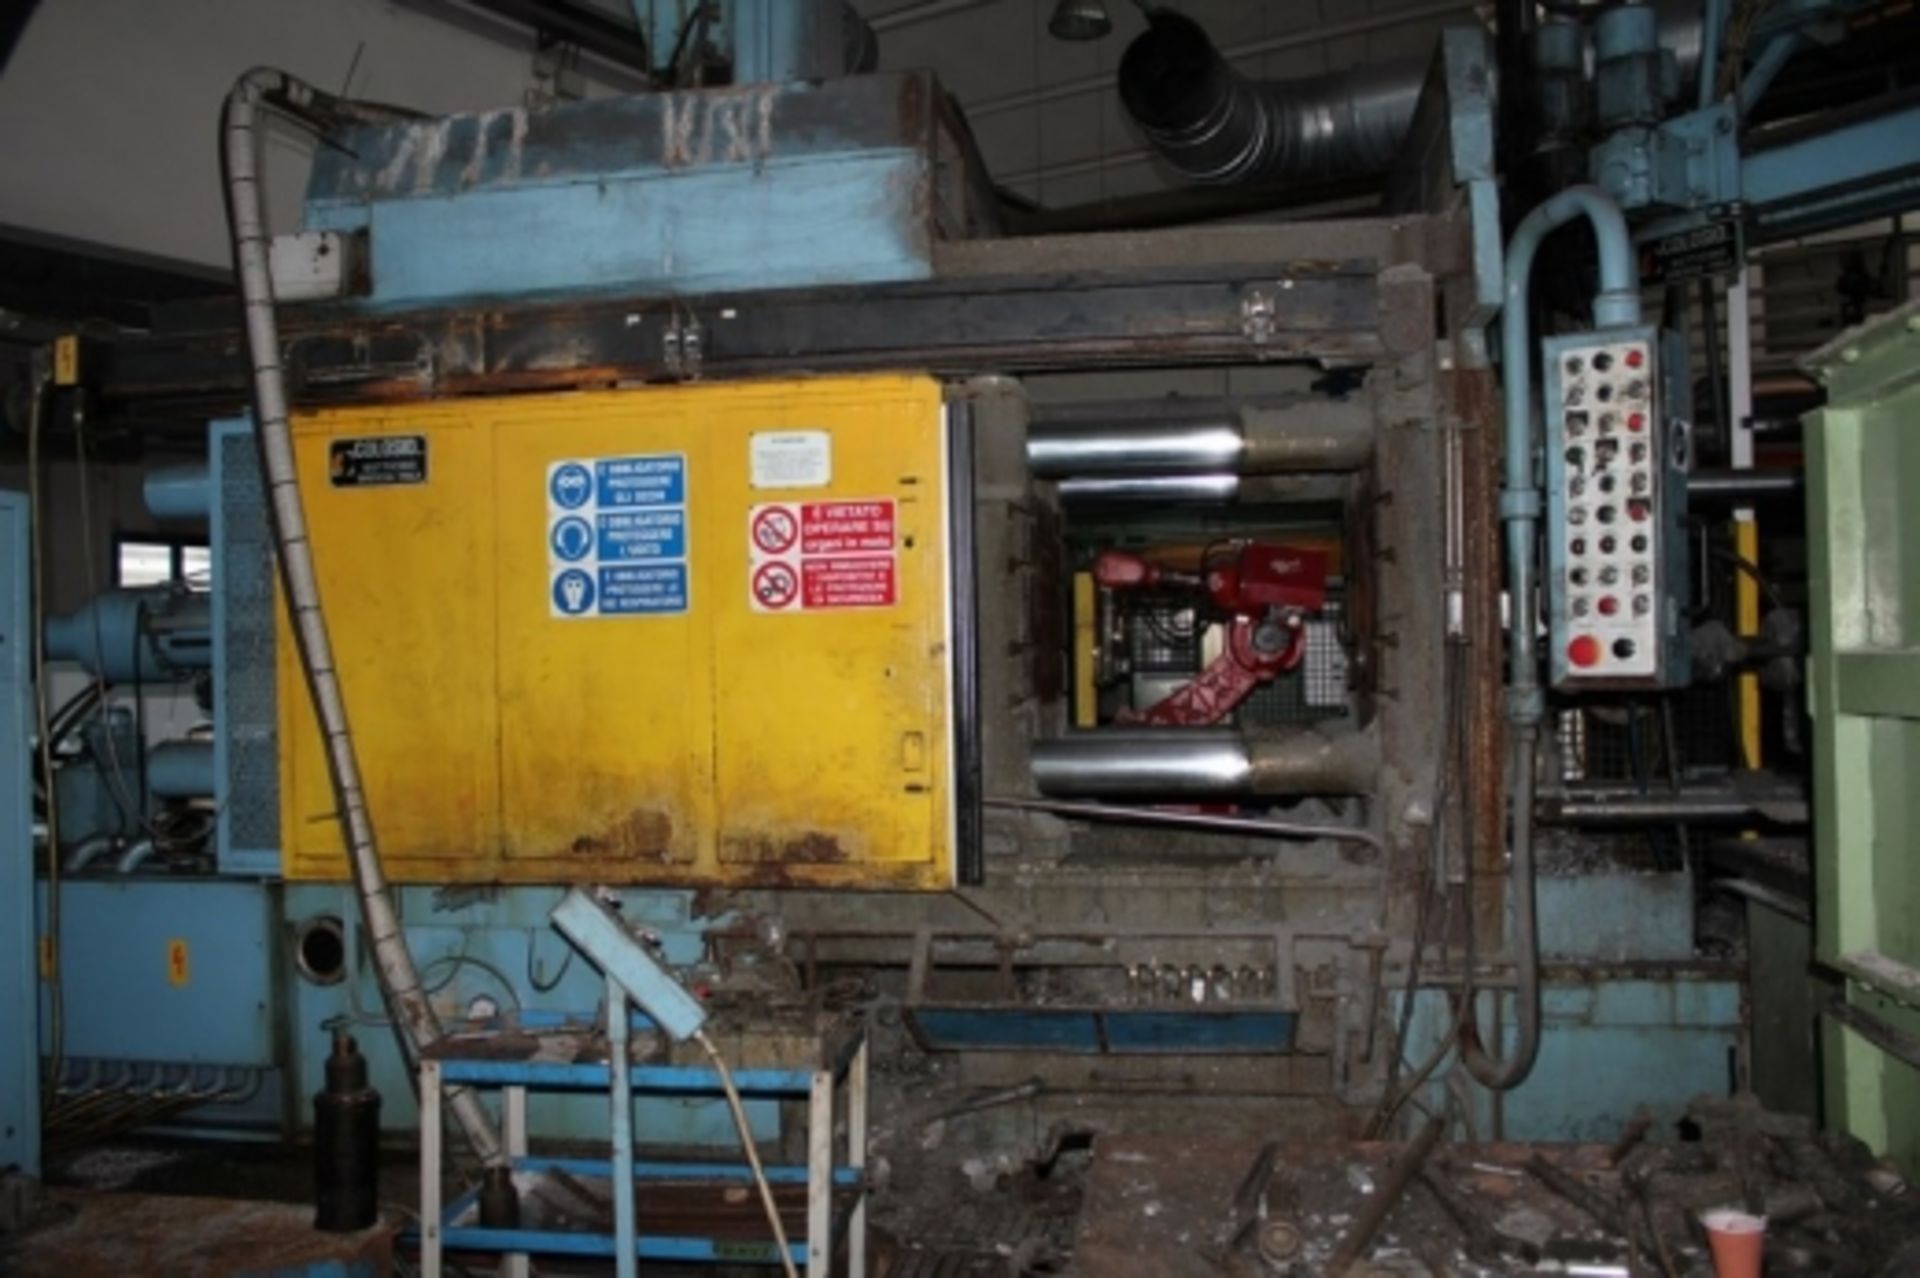 1,Die casting unit 500Colosio for moulding and die casting PFO 500 year 1996, serial no. 835 power